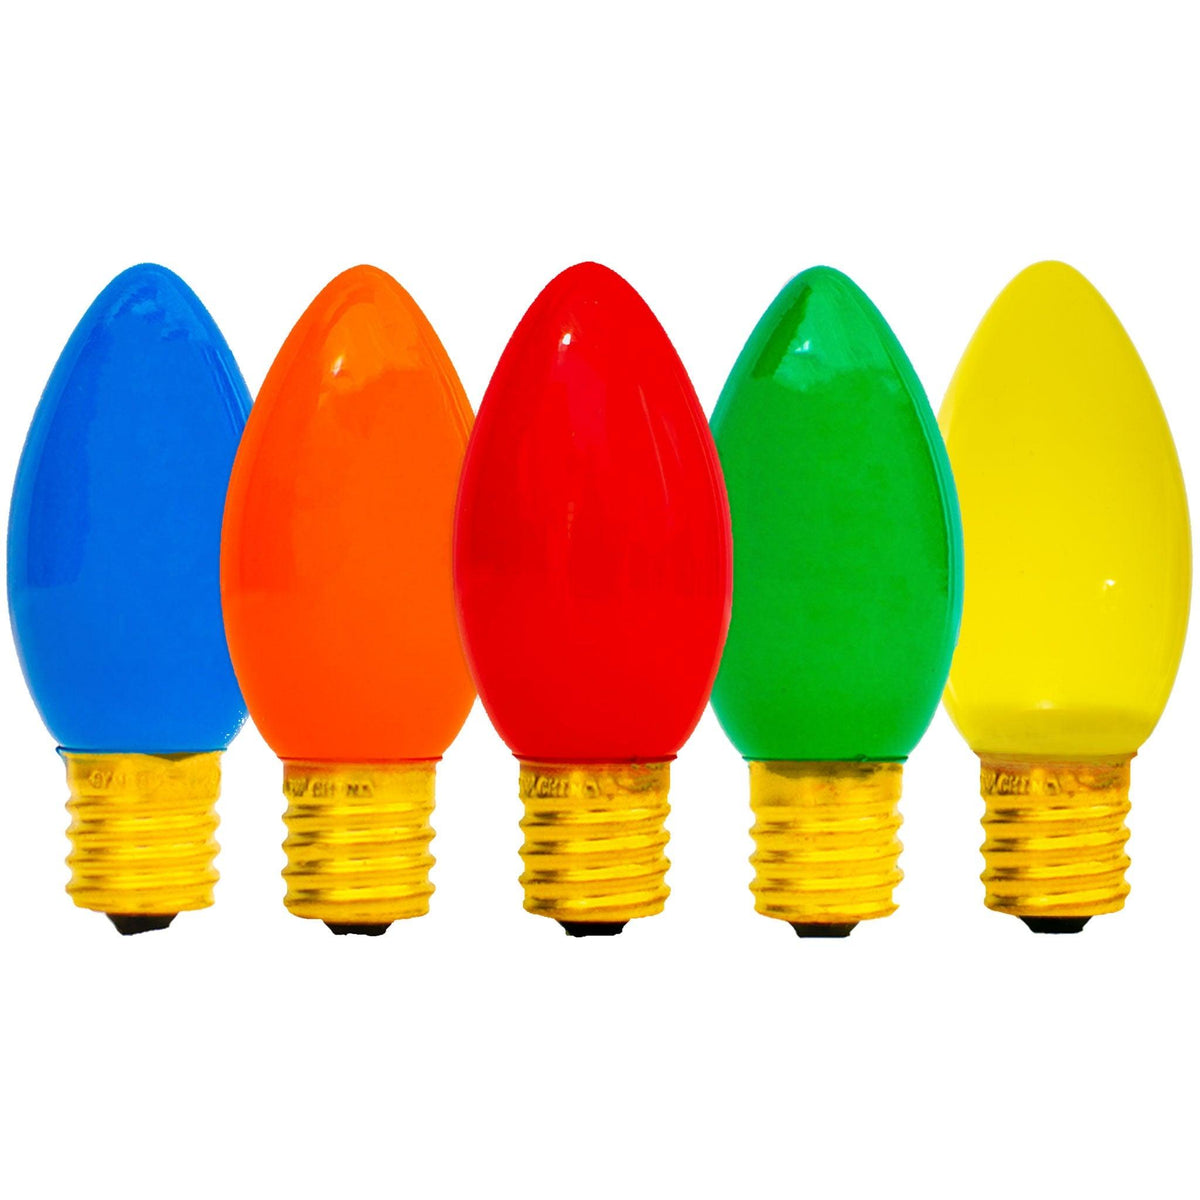 Boxes of Solid Ceramic Multicolor Light Bulbs on sale from leedisplay.com